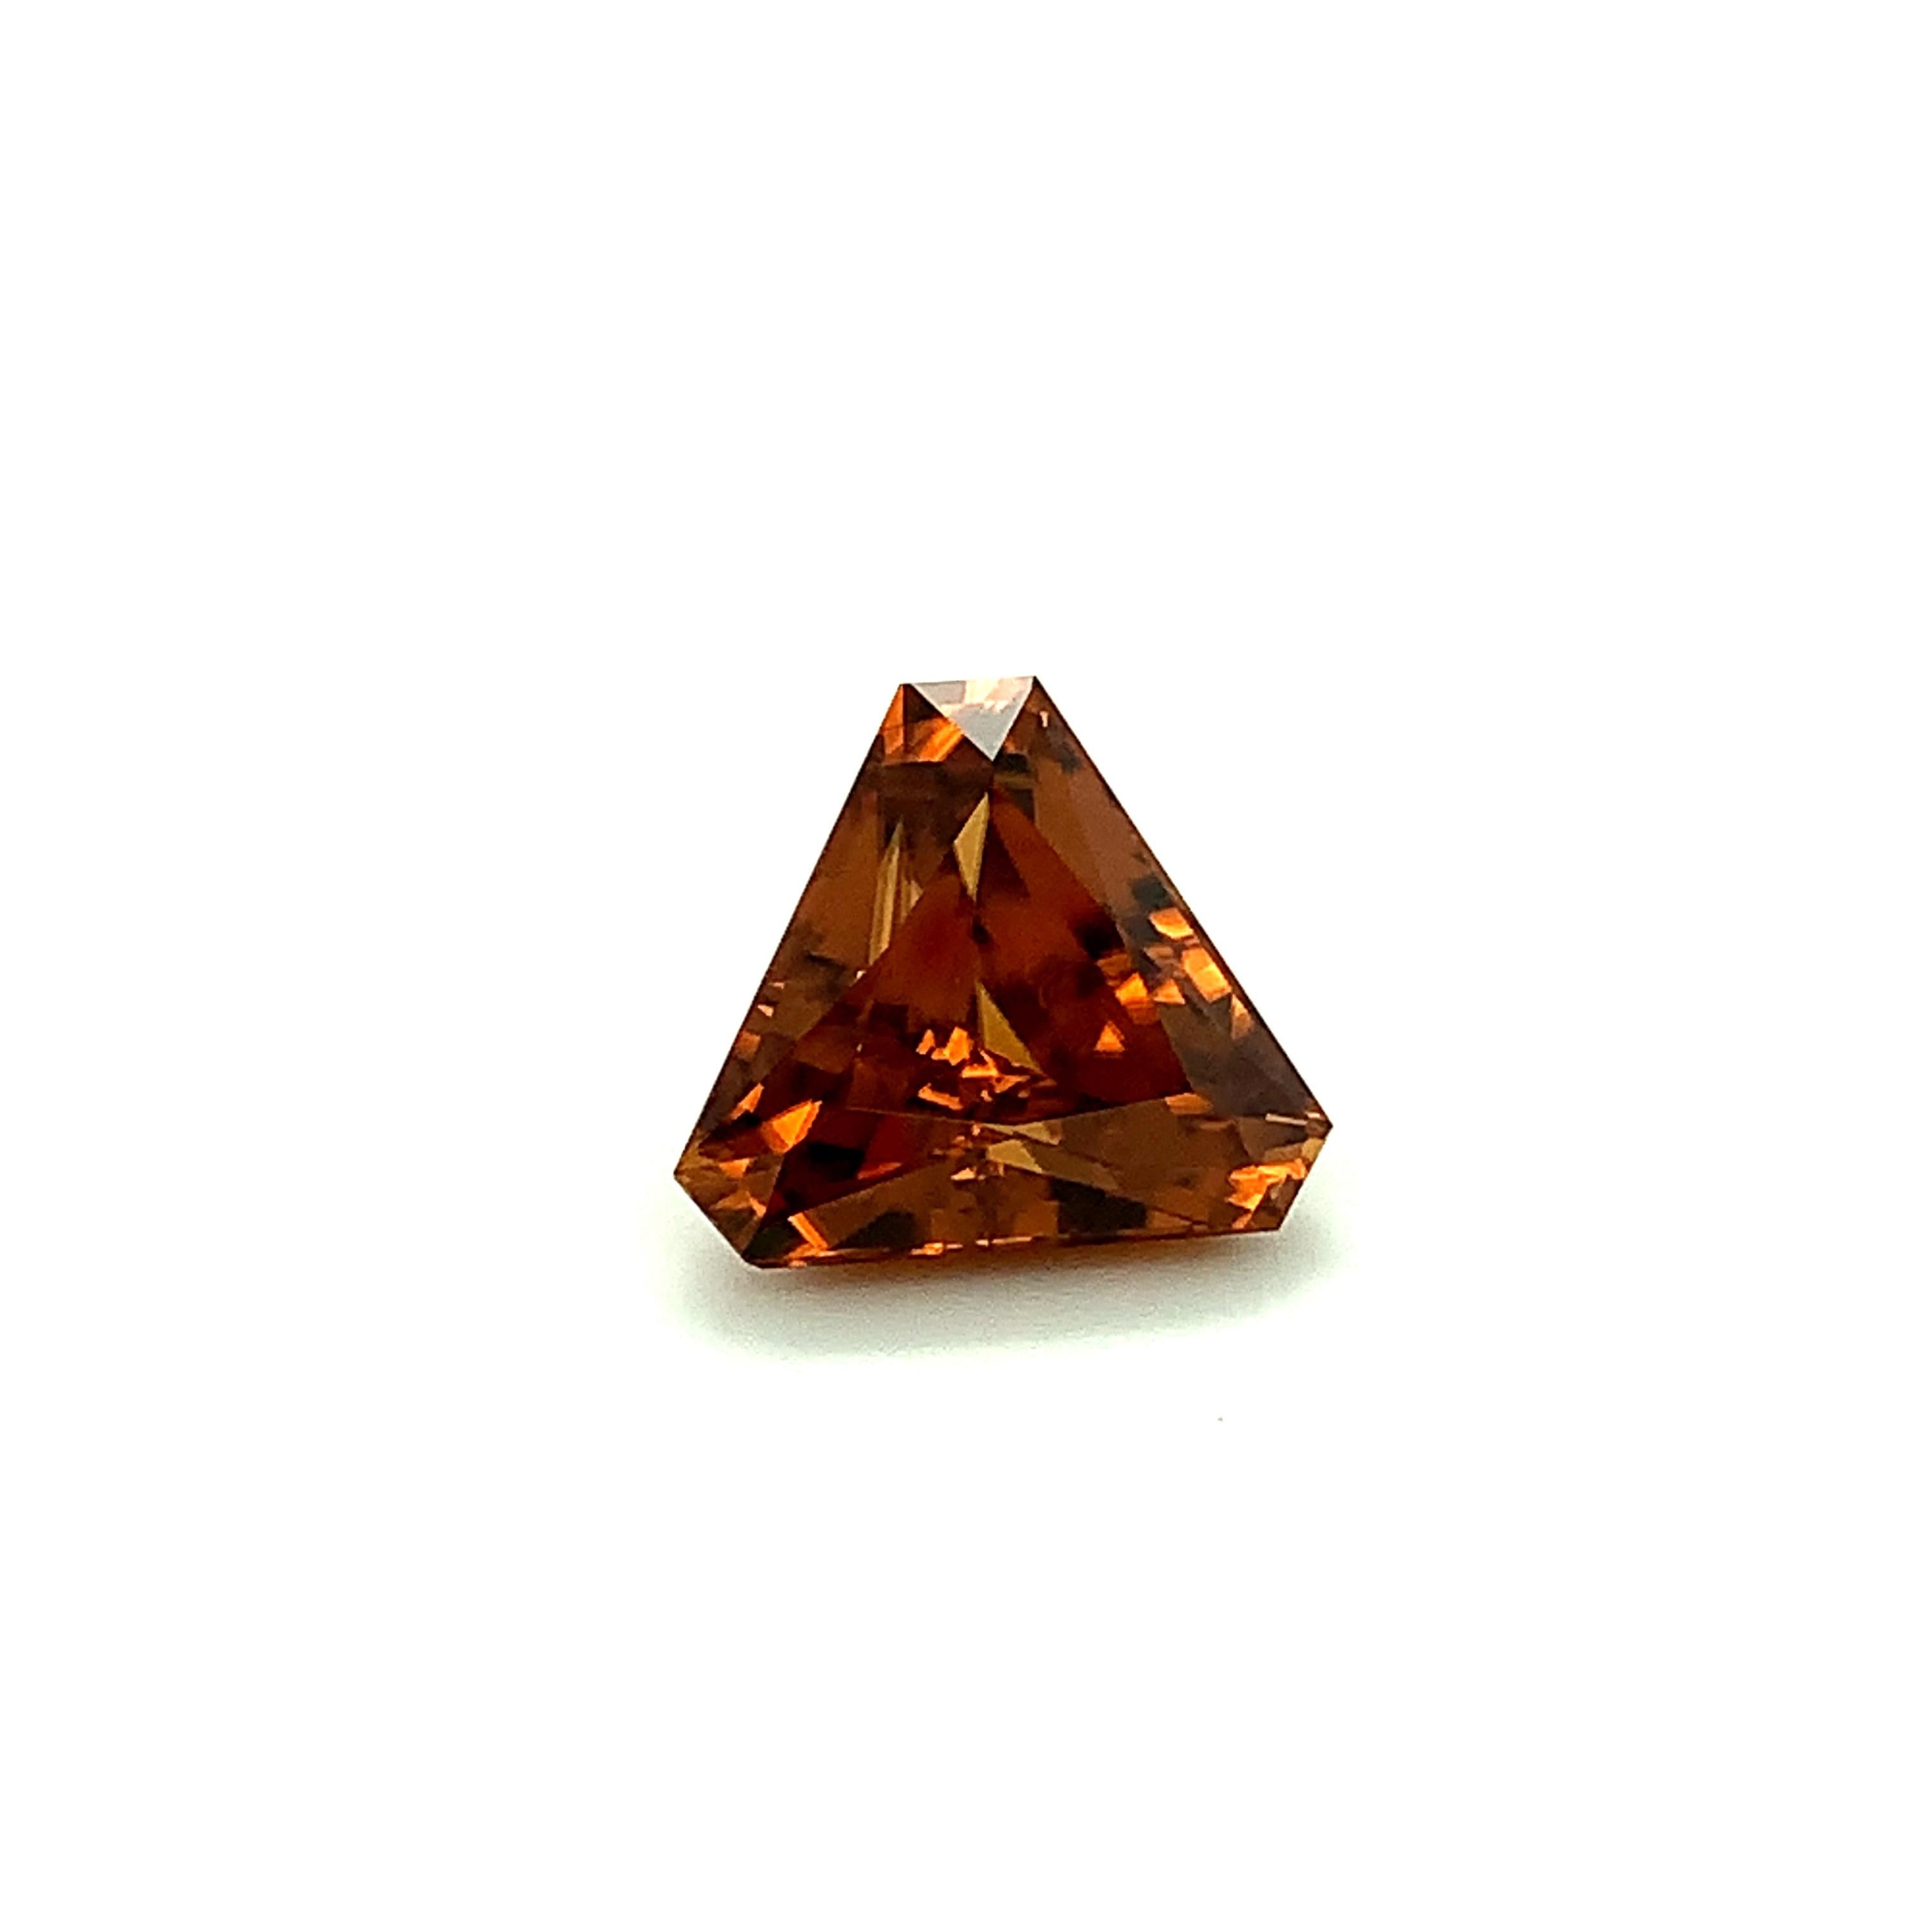 This rich, cognac colored zircon has been faceted into a unique triangle shape that exhibits stunning life and brilliance! While zircon is more commonly recognized as the bright blue December birthstone, this gem occurs in a rainbow of colors,